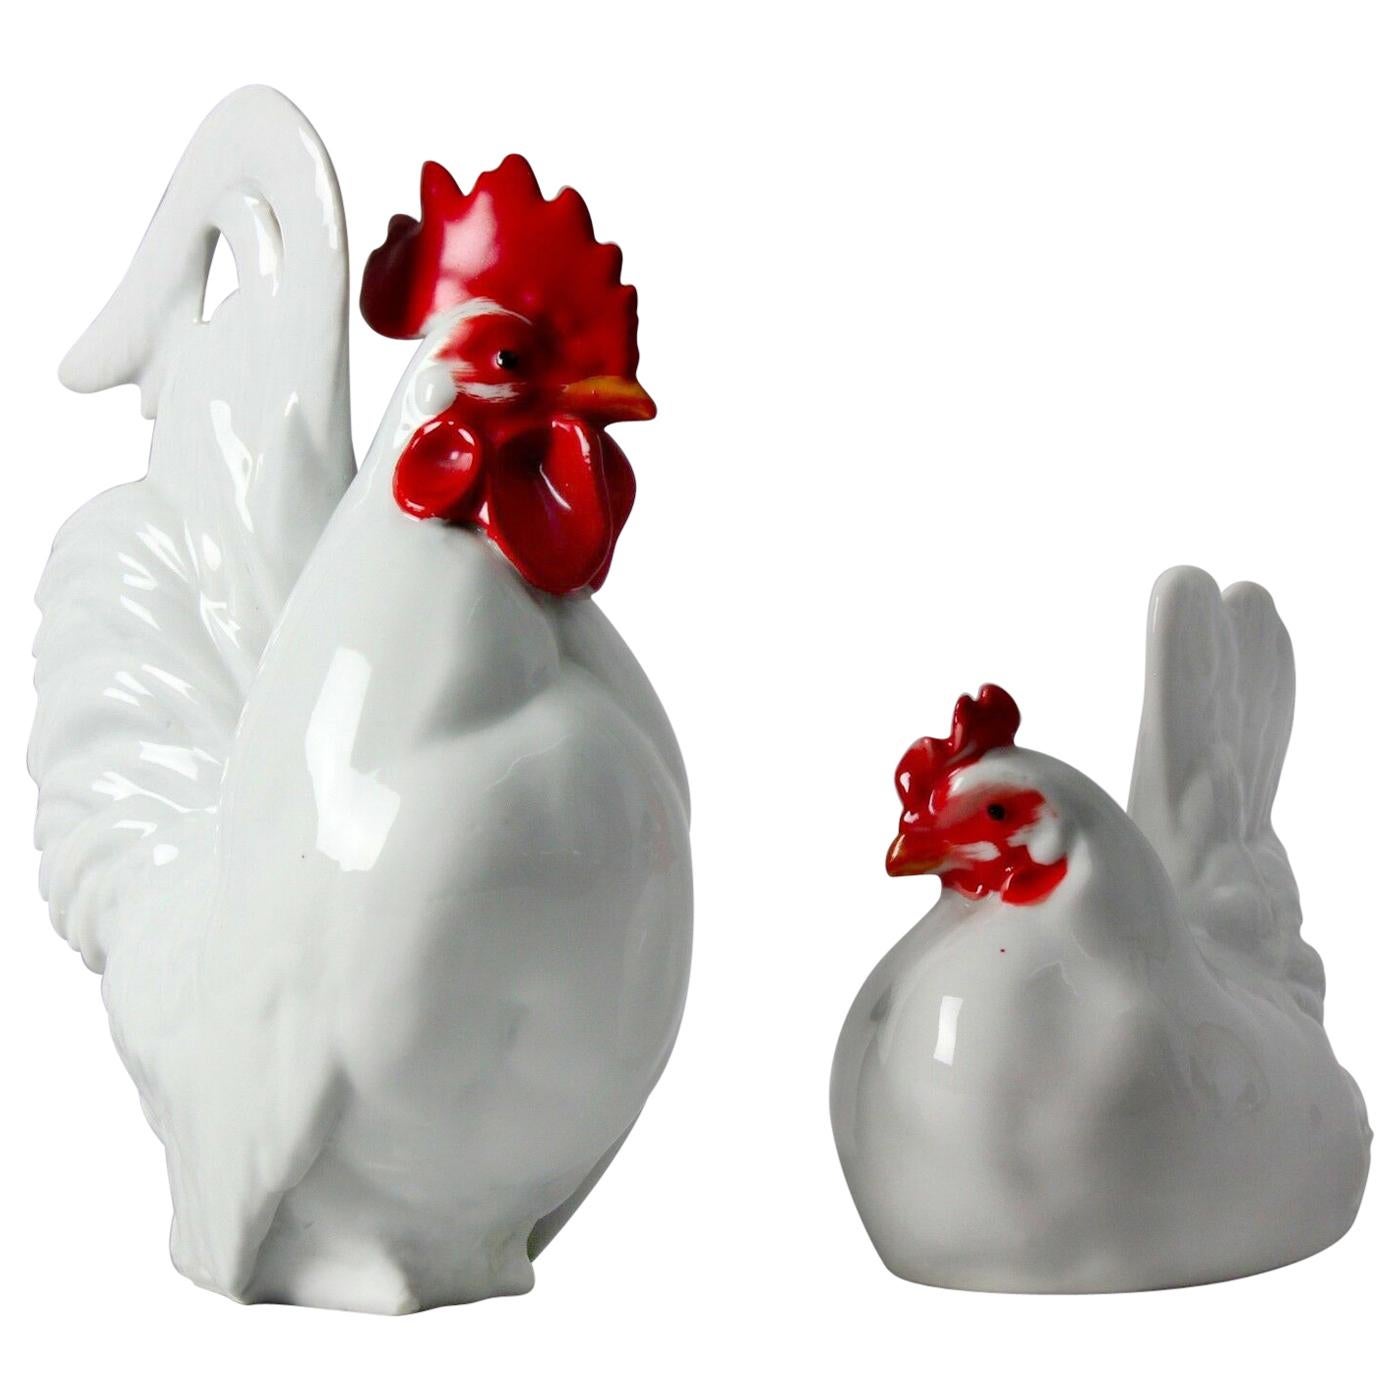 Japanese Showa Arita Porcelain Rooster and Hen Figures For Sale